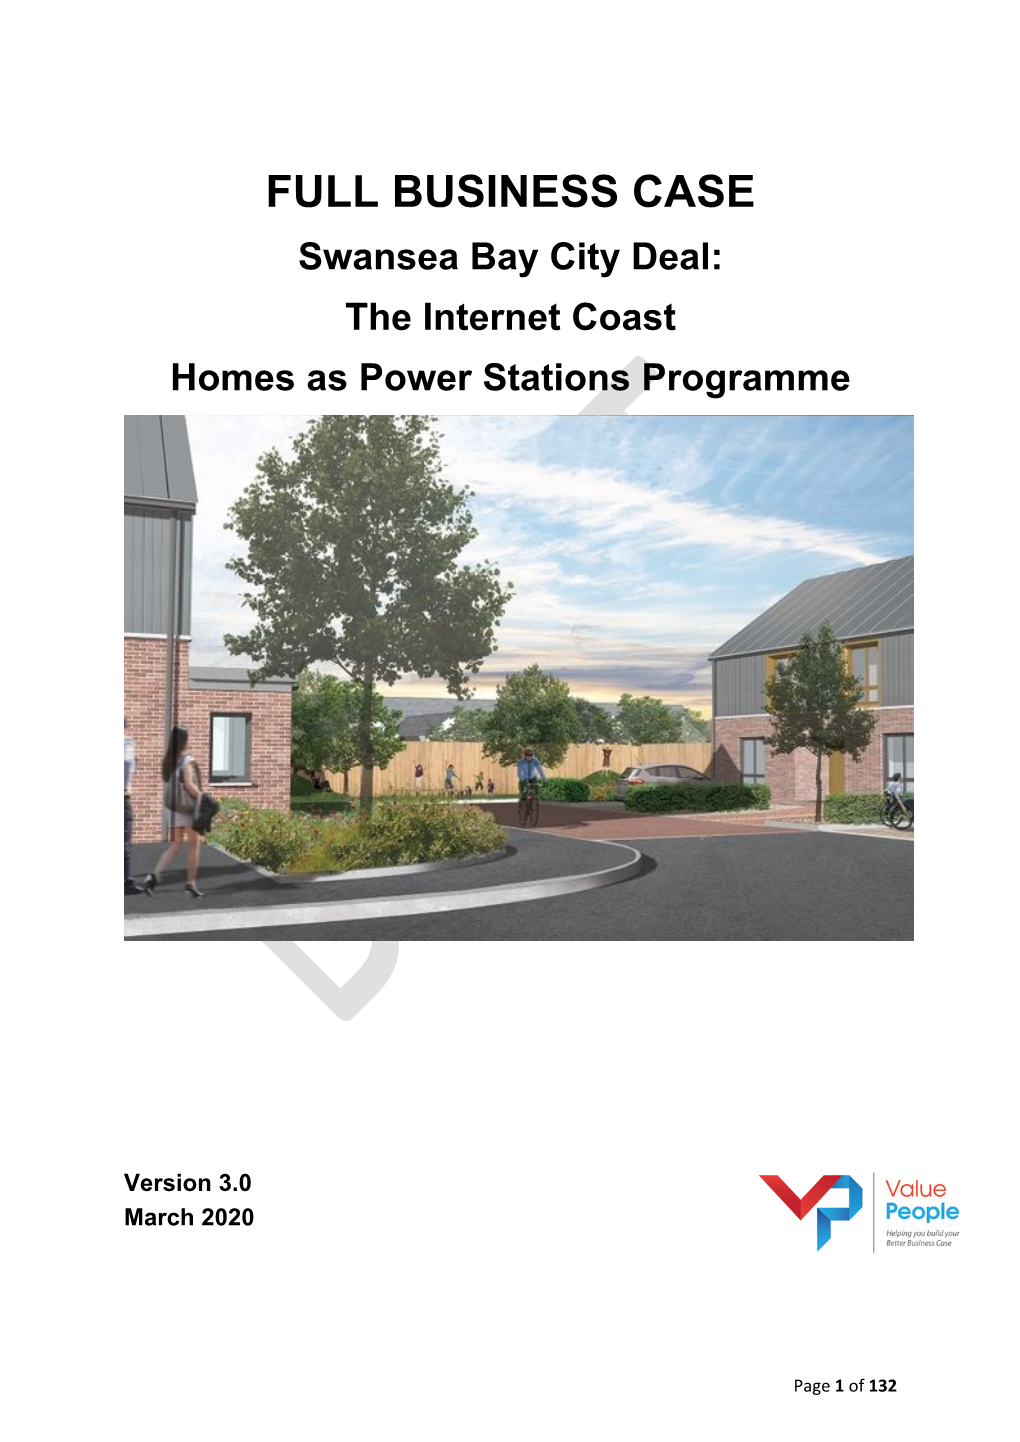 FULL BUSINESS CASE Swansea Bay City Deal: the Internet Coast Homes As Power Stations Programme